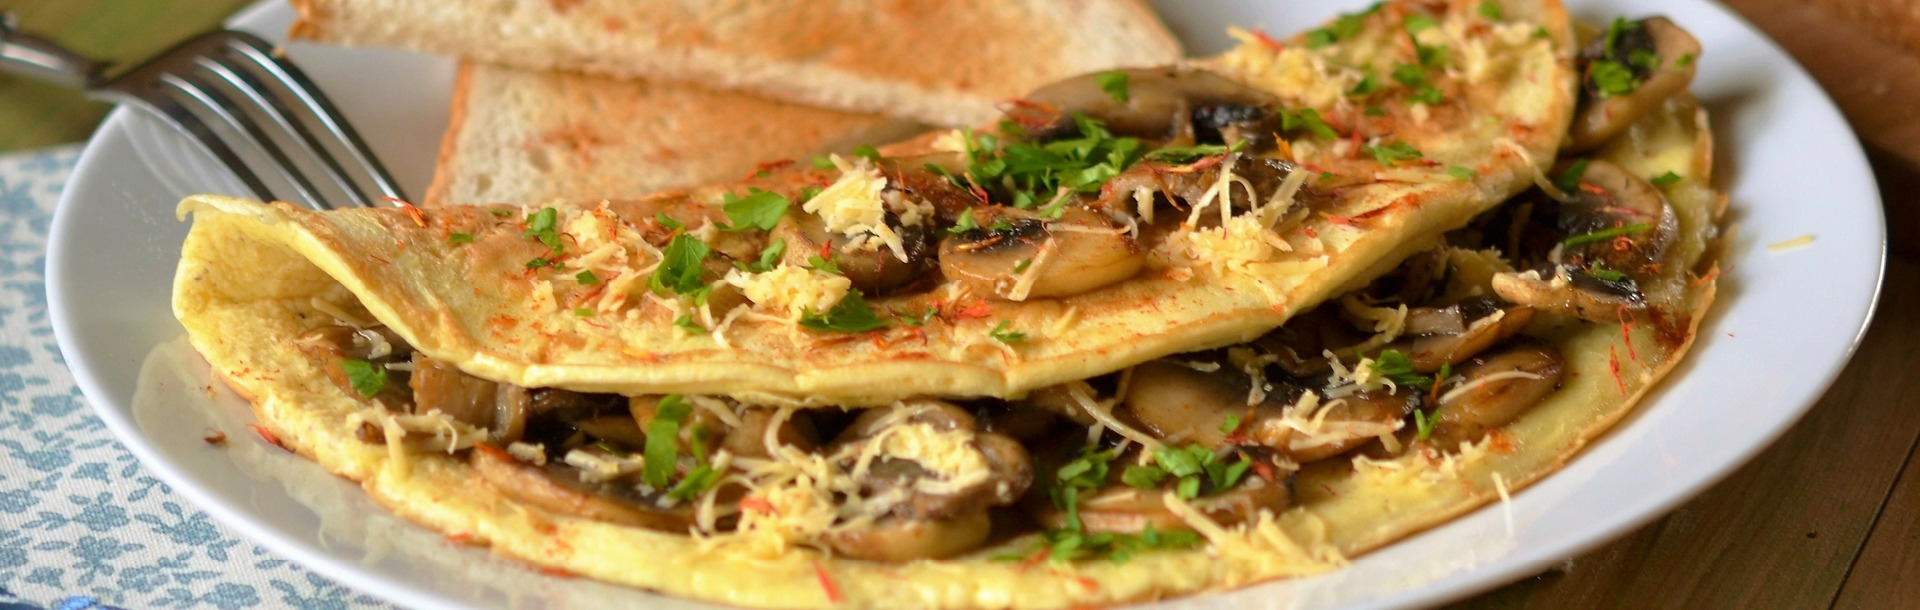 Cheese and mushroom omelette